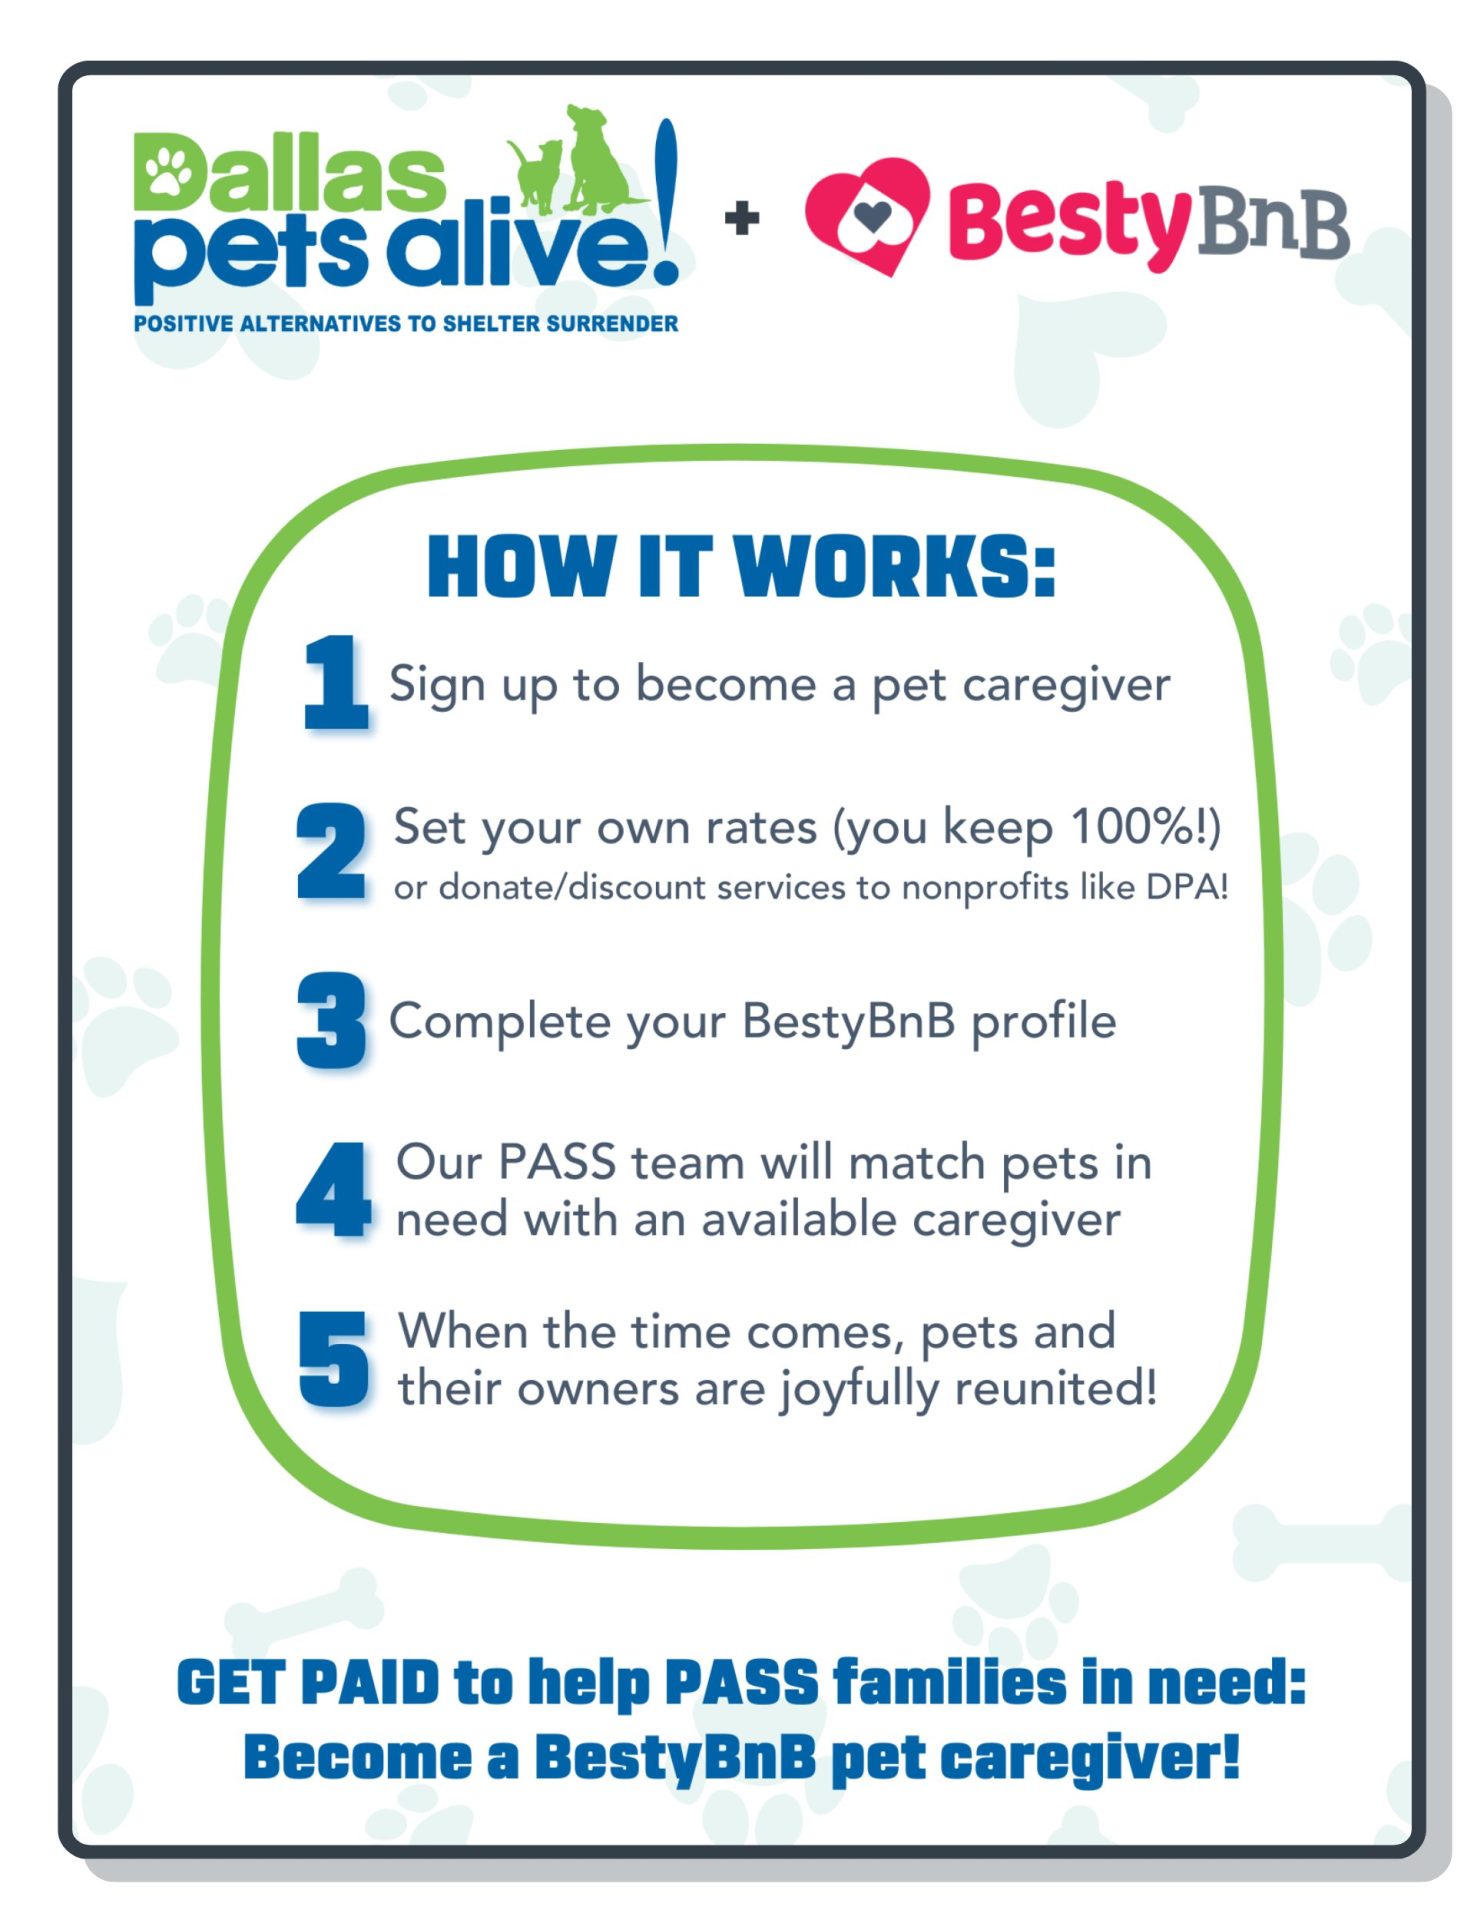 BestyBnB: how the program works. 1. Sign up to become a pet caregiver. 2. Set your own rates (you'll keep 100%!) or donate/discount services to nonprofits like DPA. 3. Complete your BestyBnB profile. 4. Our PASS team will 'book' a stay for pets in need with an available caregiver. 5. When the time comes, pets will be joyfully reunited with their owners!